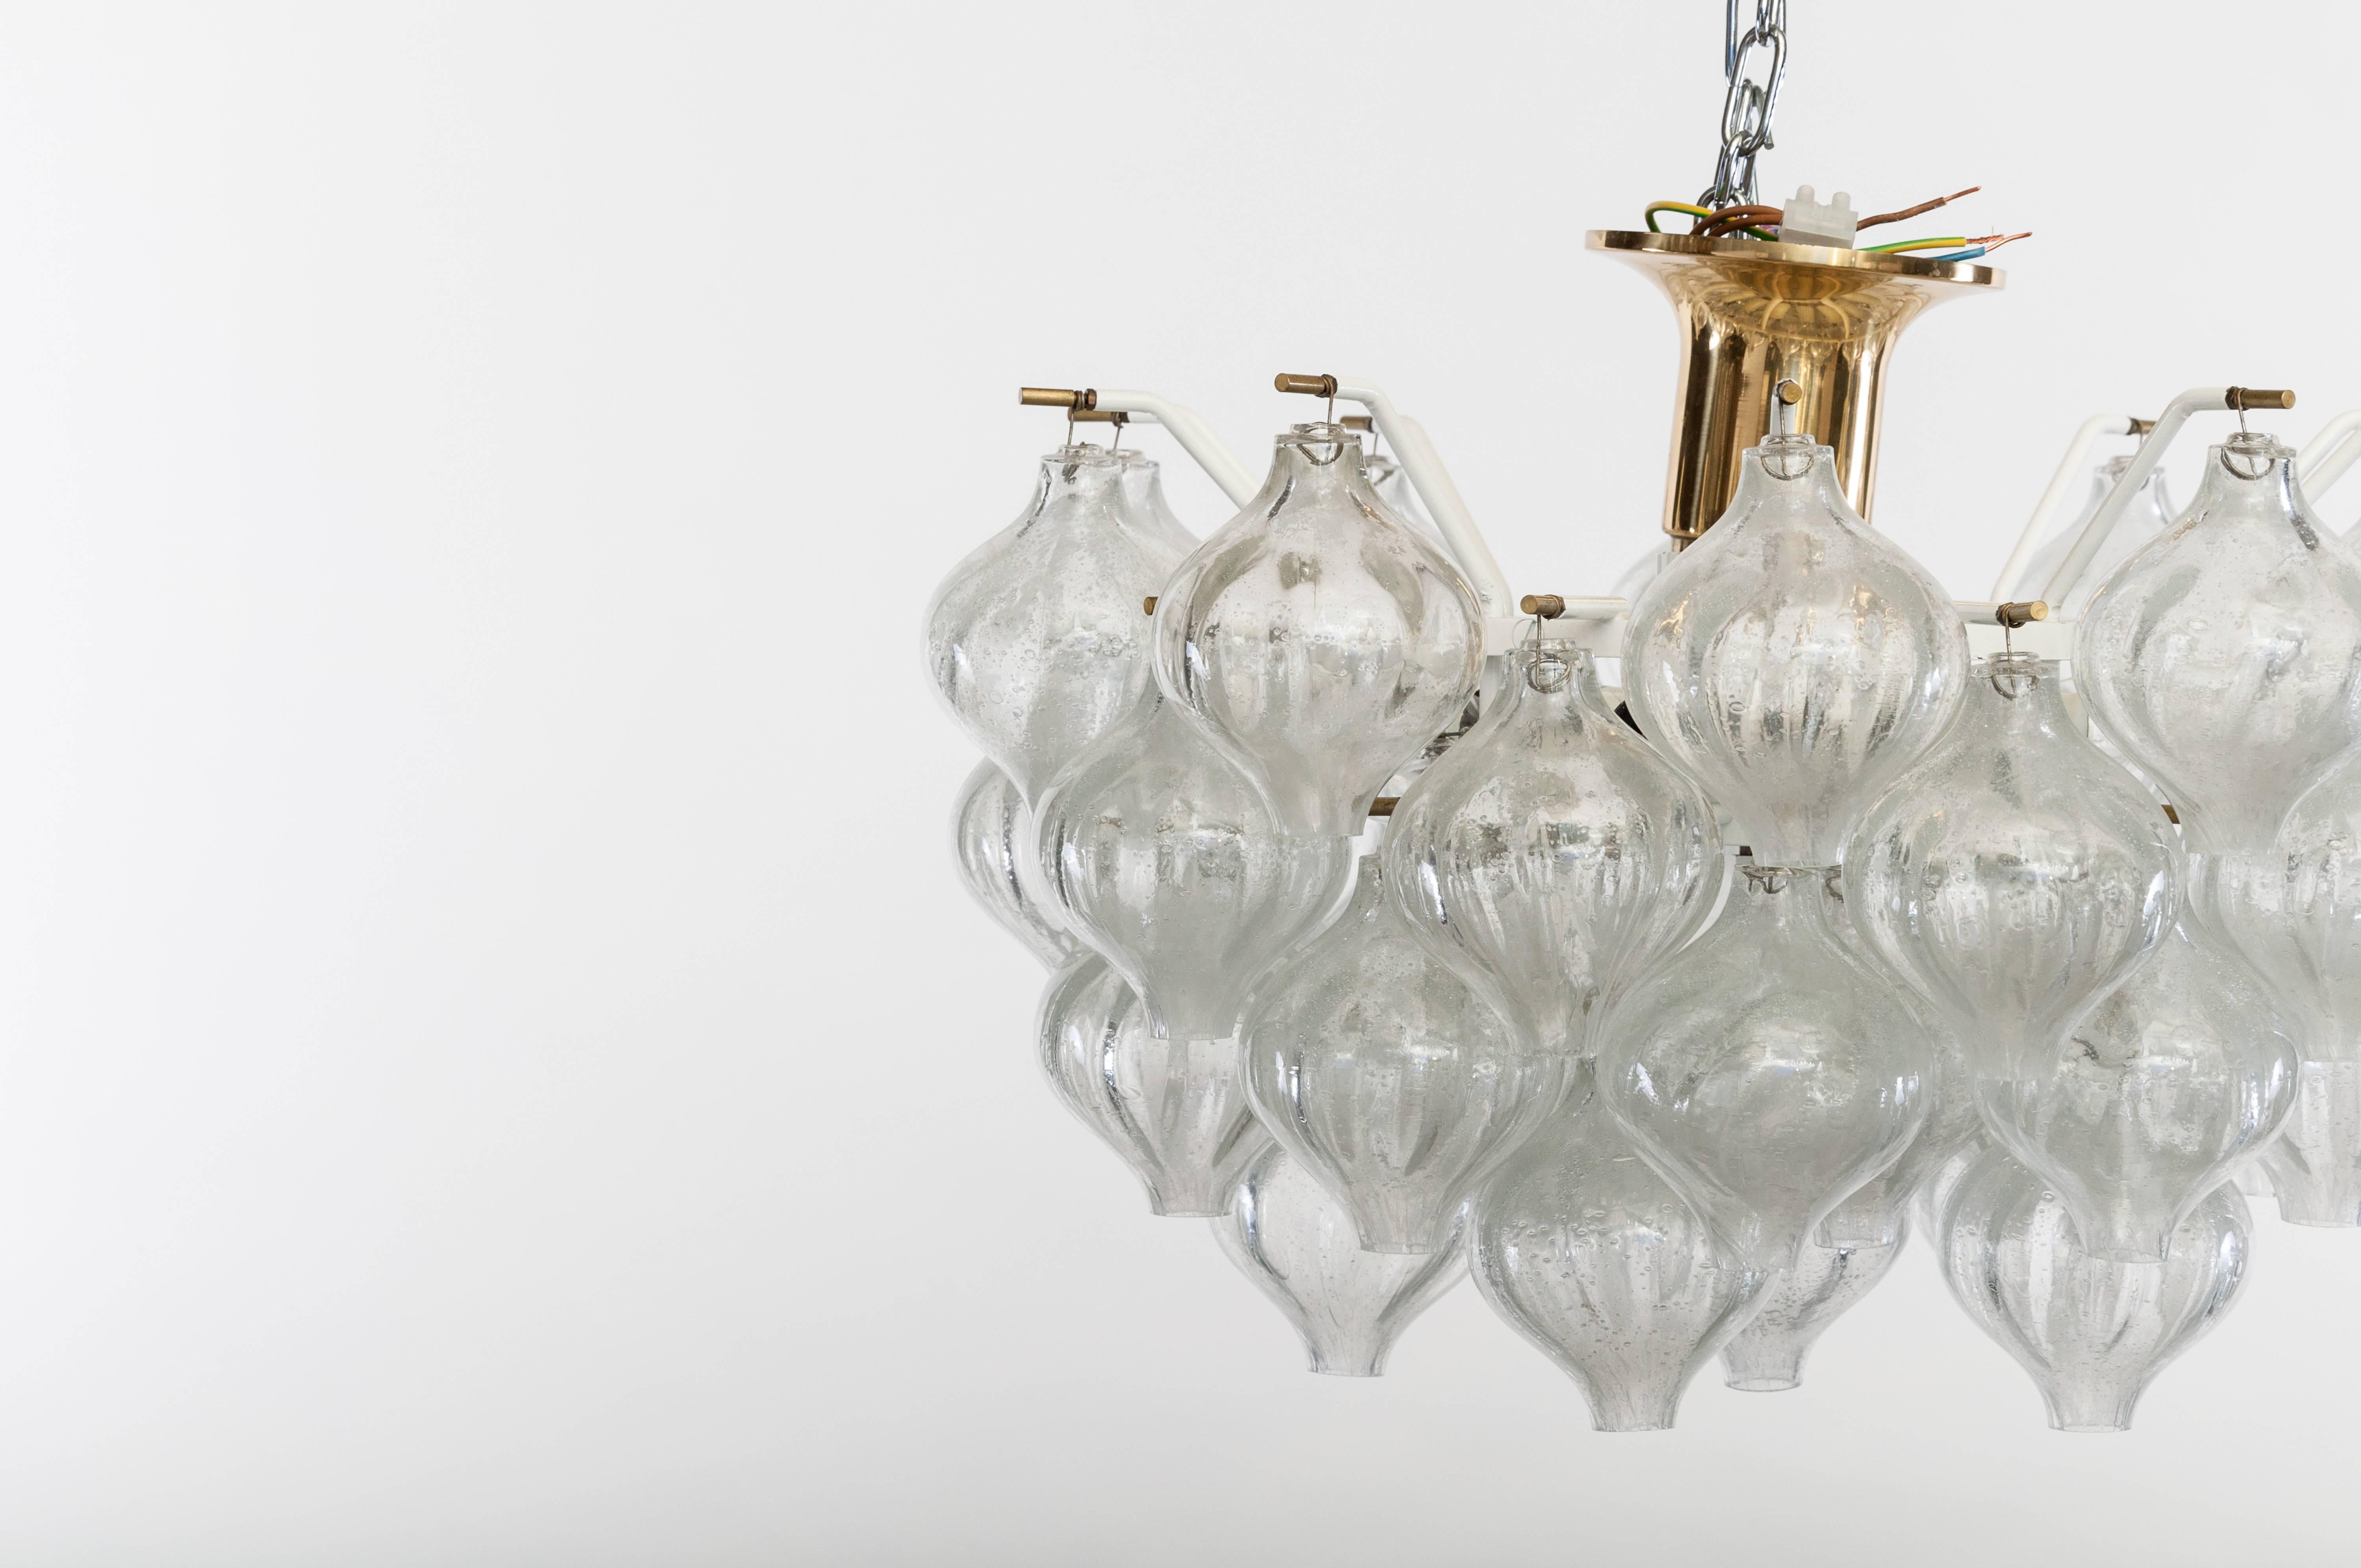 A beautiful Tulipan chandelier manufactured by the famous designer and company J.T. Kalmar.
The chandelier consists of a white metal structure and has 20 arms, each arm has two handblown onion-shaped glass spheres.
The spheres are attached to the